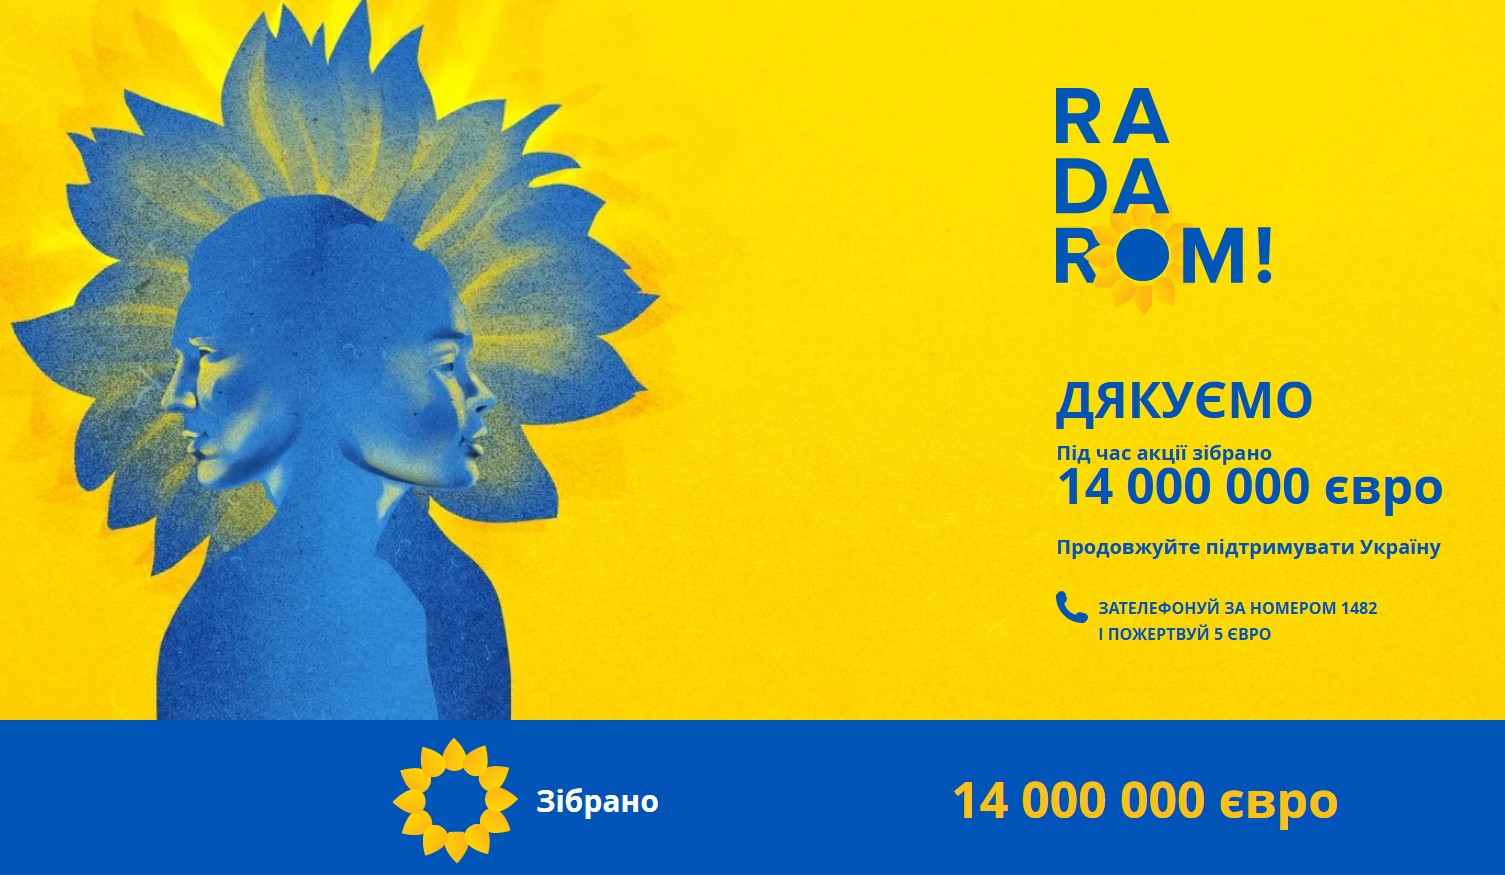 Lithuania raises 14 million euros for radars for Ukraine - almost three times more than planned